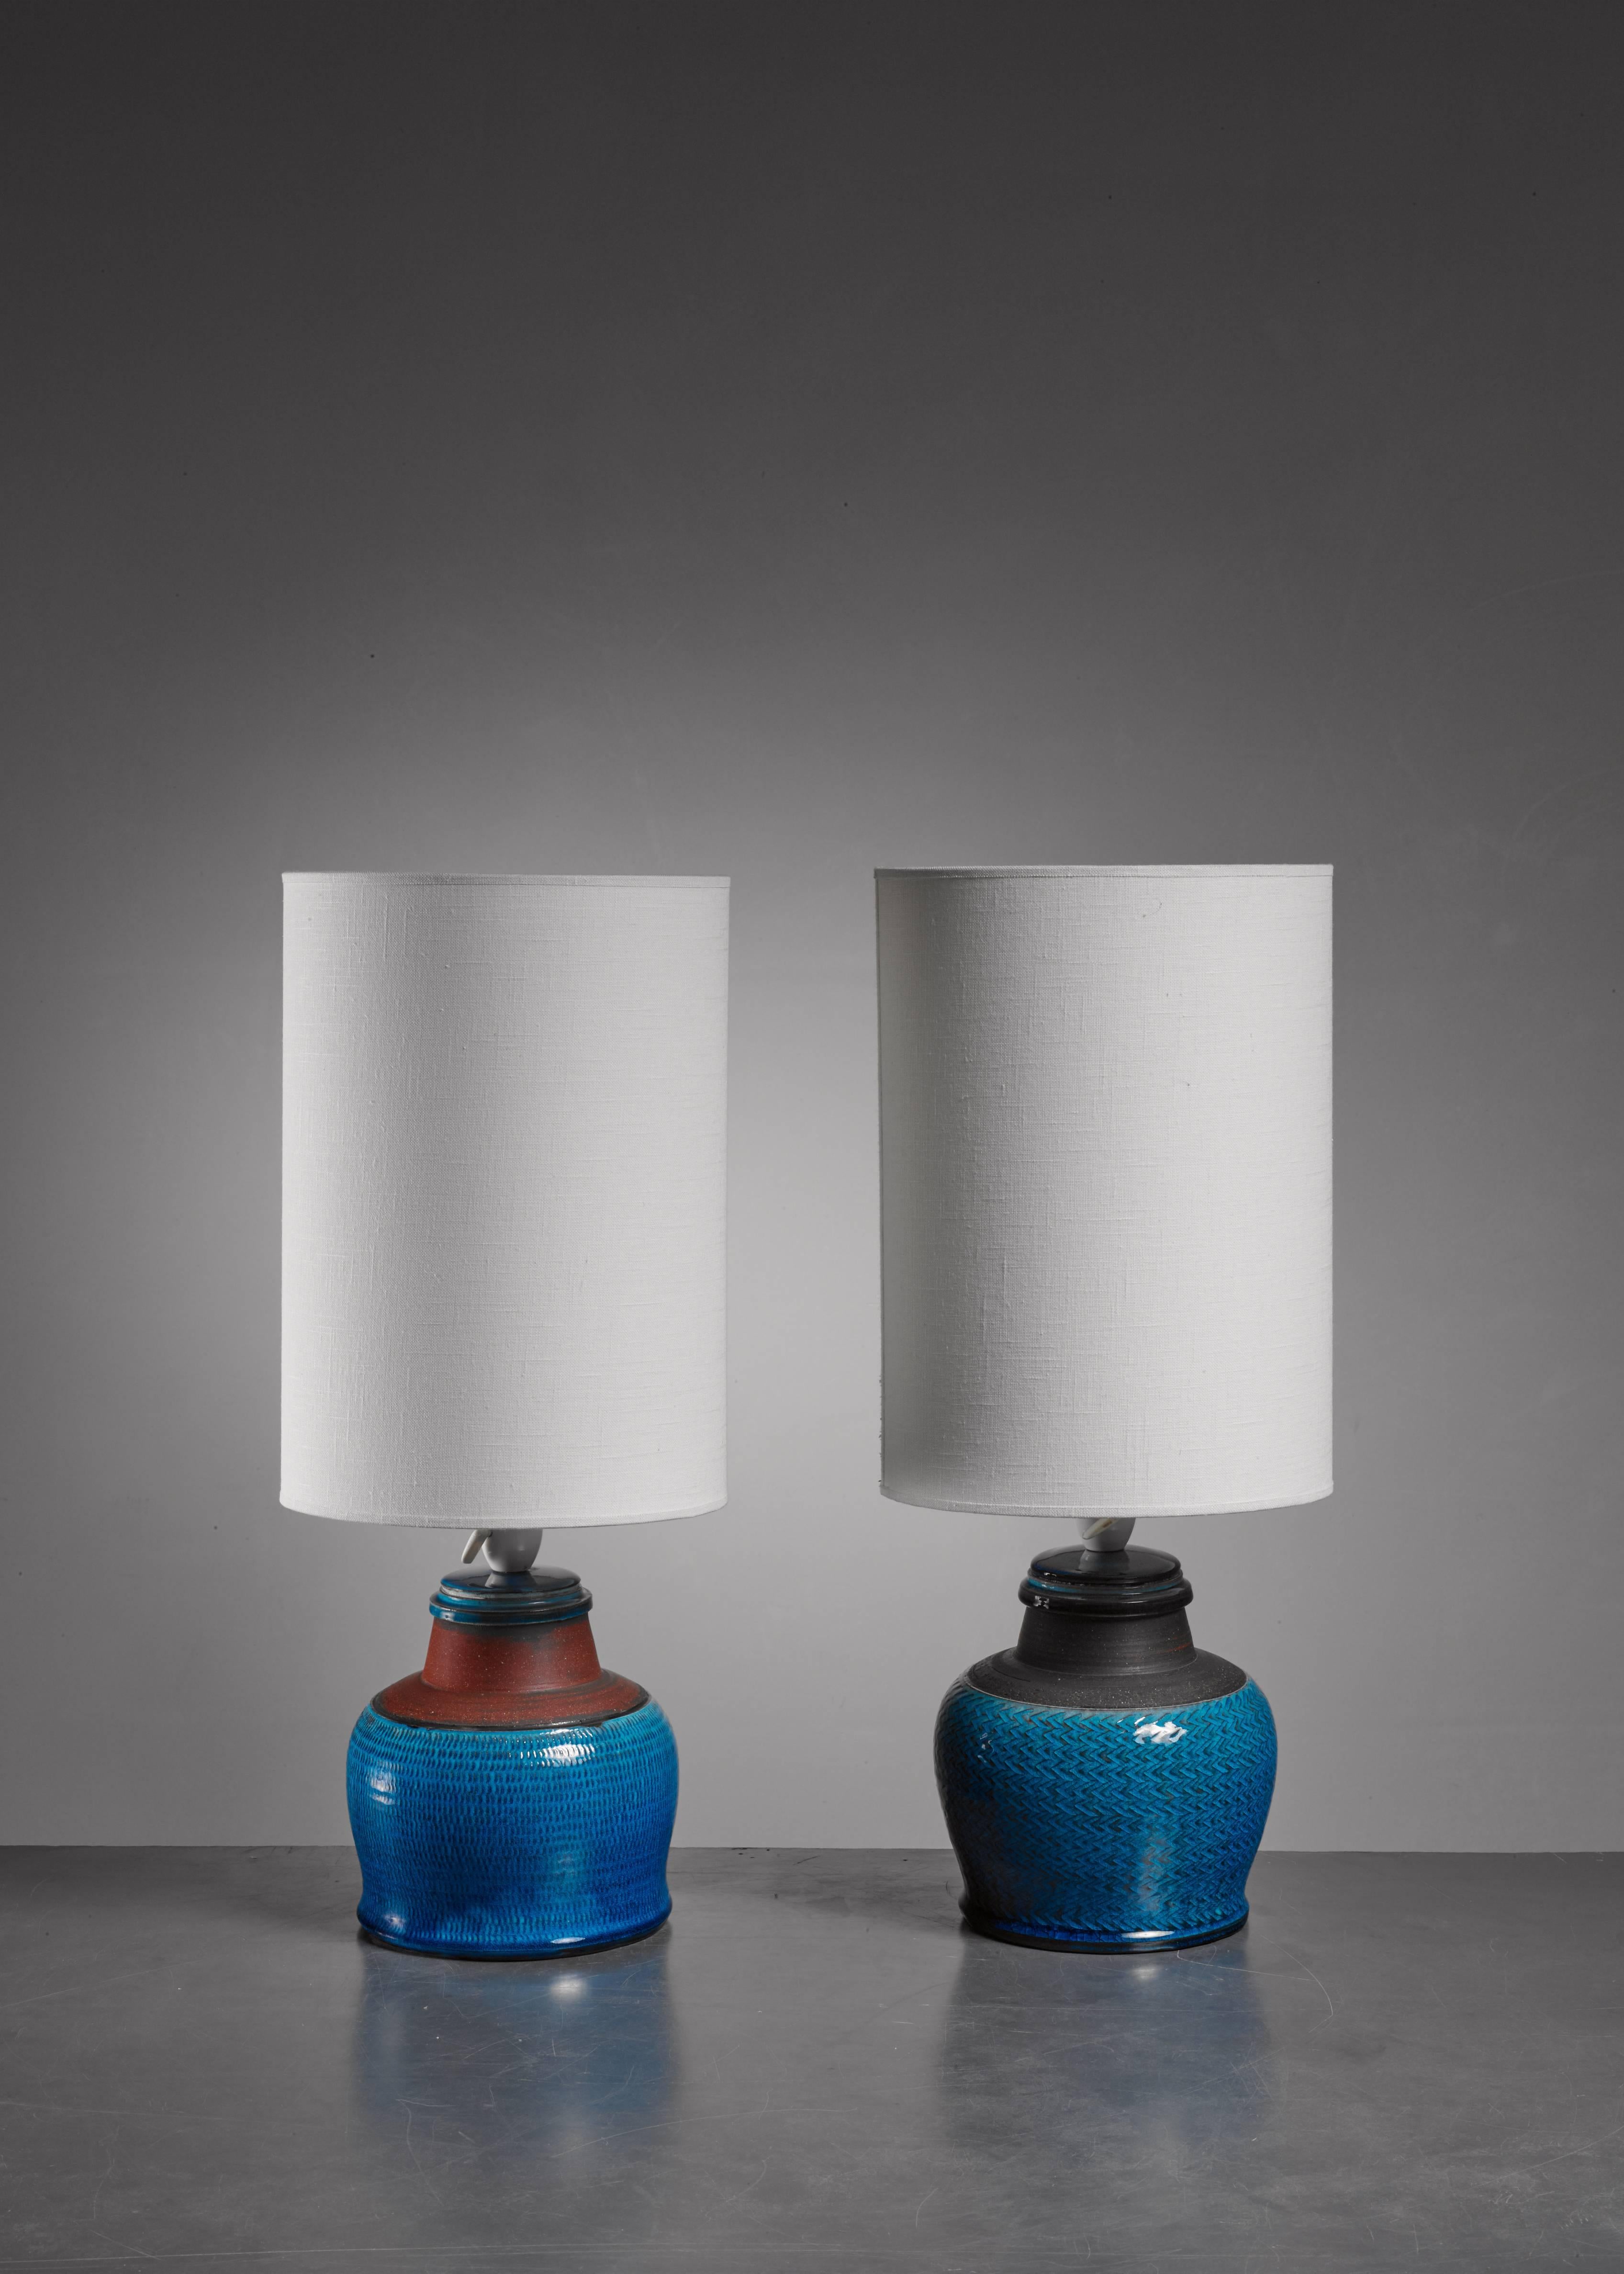 A pair of bulbous, blue and brown ceramic table lamps by Kähler.

The measurements stated are of the lamps without the shade. The lamps are signed by Kahler underneath and in an excellent condition.

 